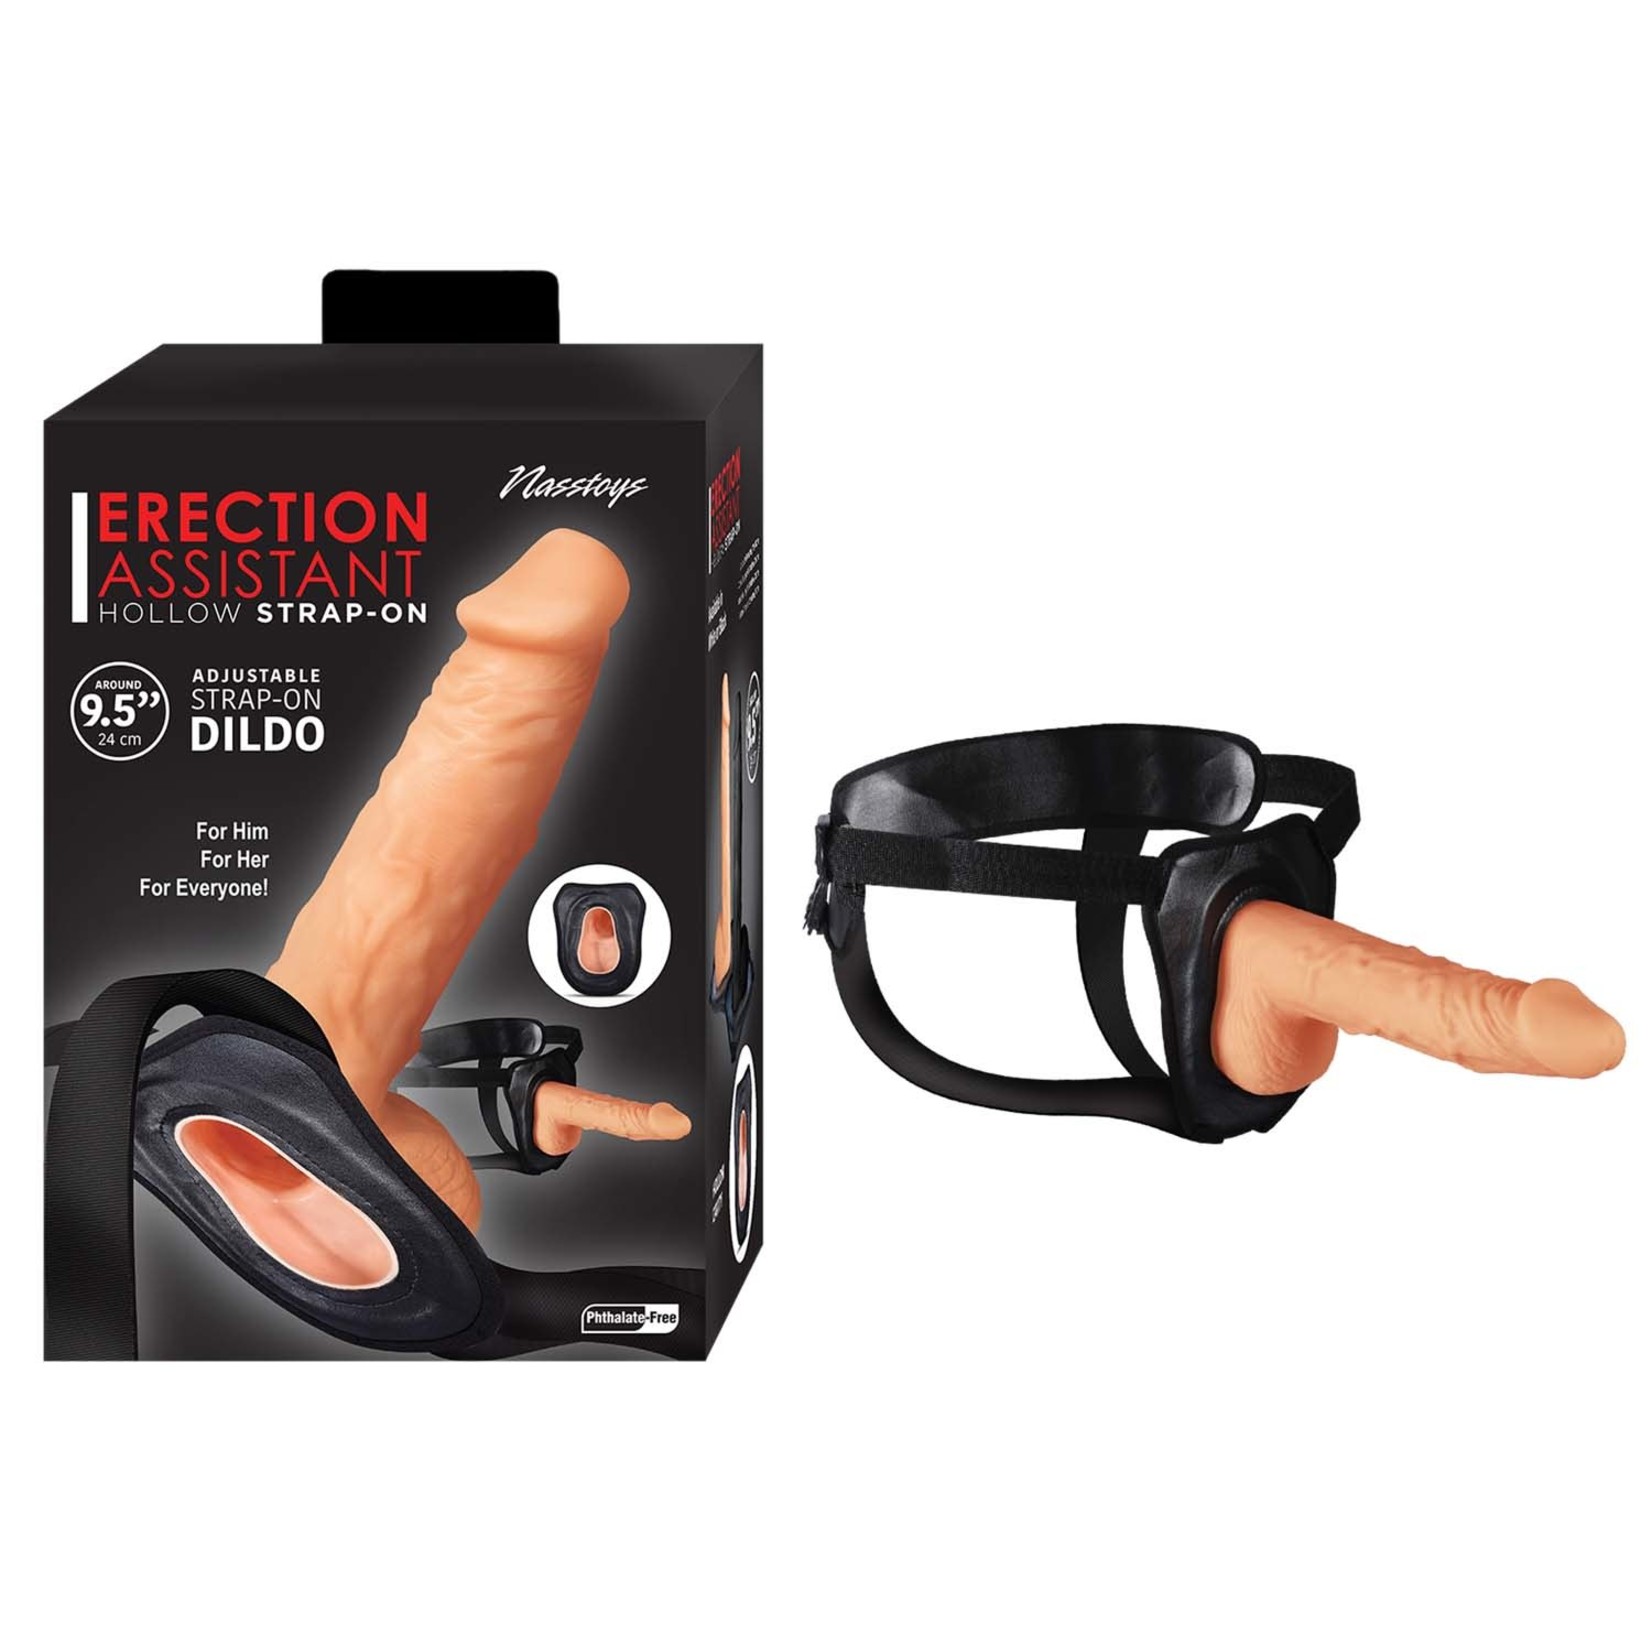 ERECTION ASSISTANT HOLLOW STRAP-ON 9.5 INCH